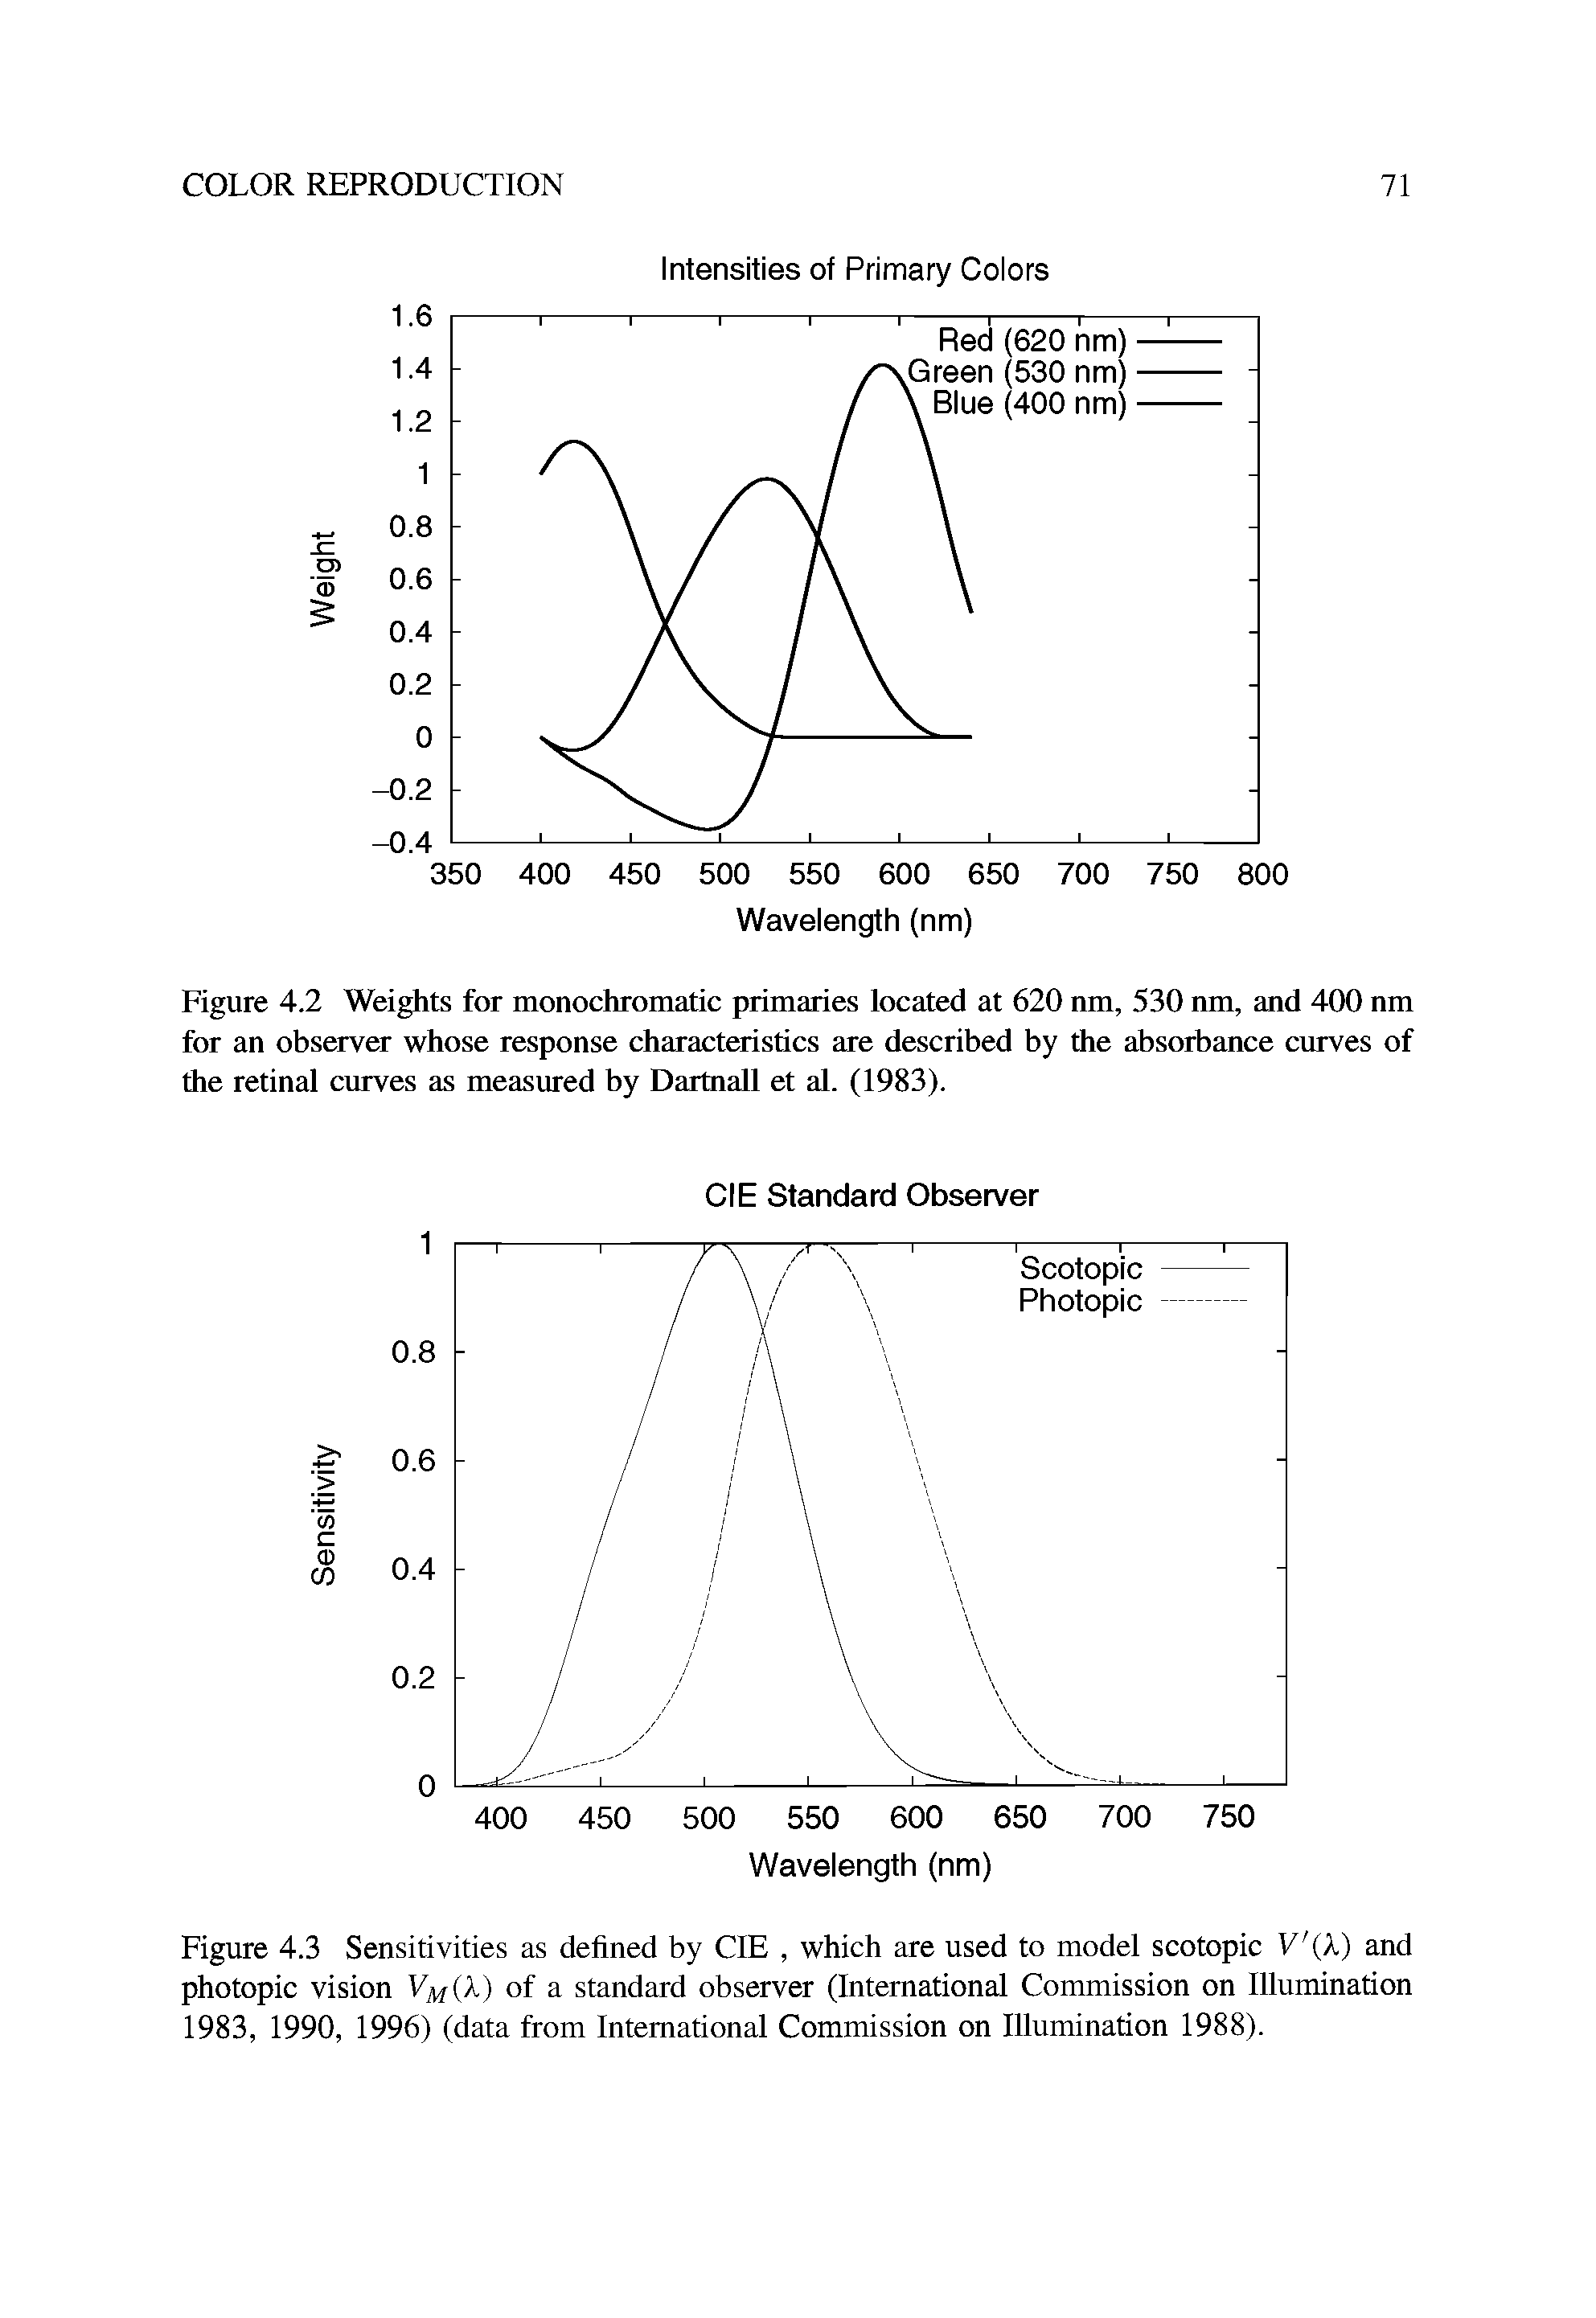 Figure 4.2 Weights for monochromatic primaries located at 620 nm, 530 nm, and 400 nm for an observer whose response characteristics are described by the absorbance curves of the retinal curves as measured by Dartnall et al. (1983).